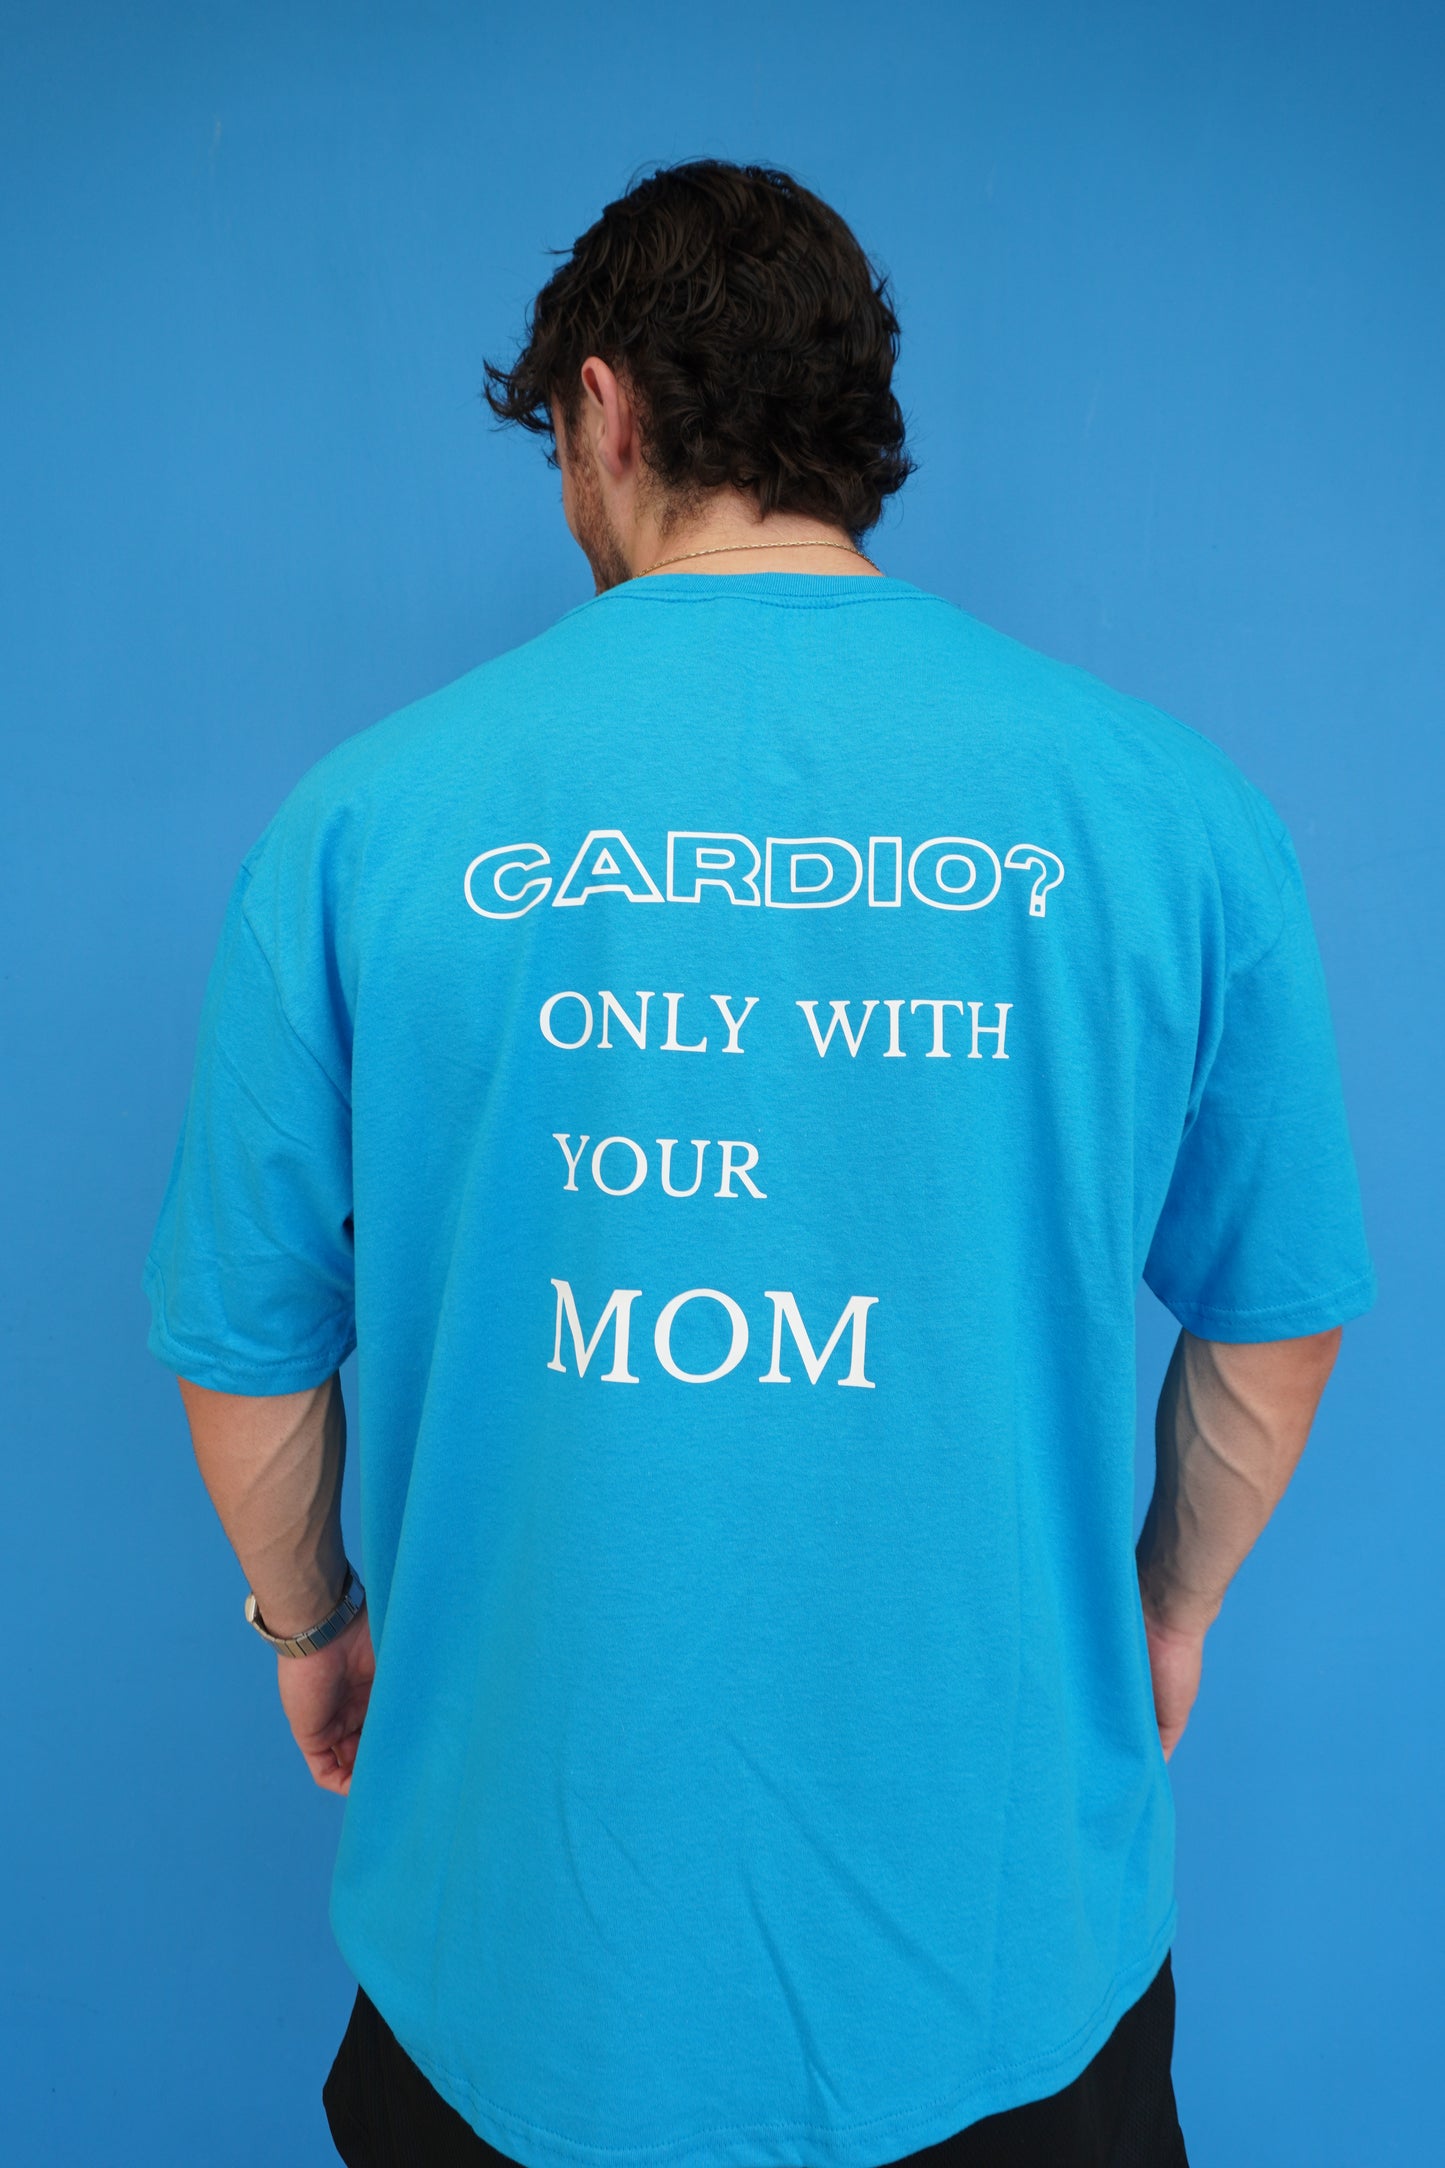 OVERSIZE "CARDIO? ONLY WITH YOUR MOM"